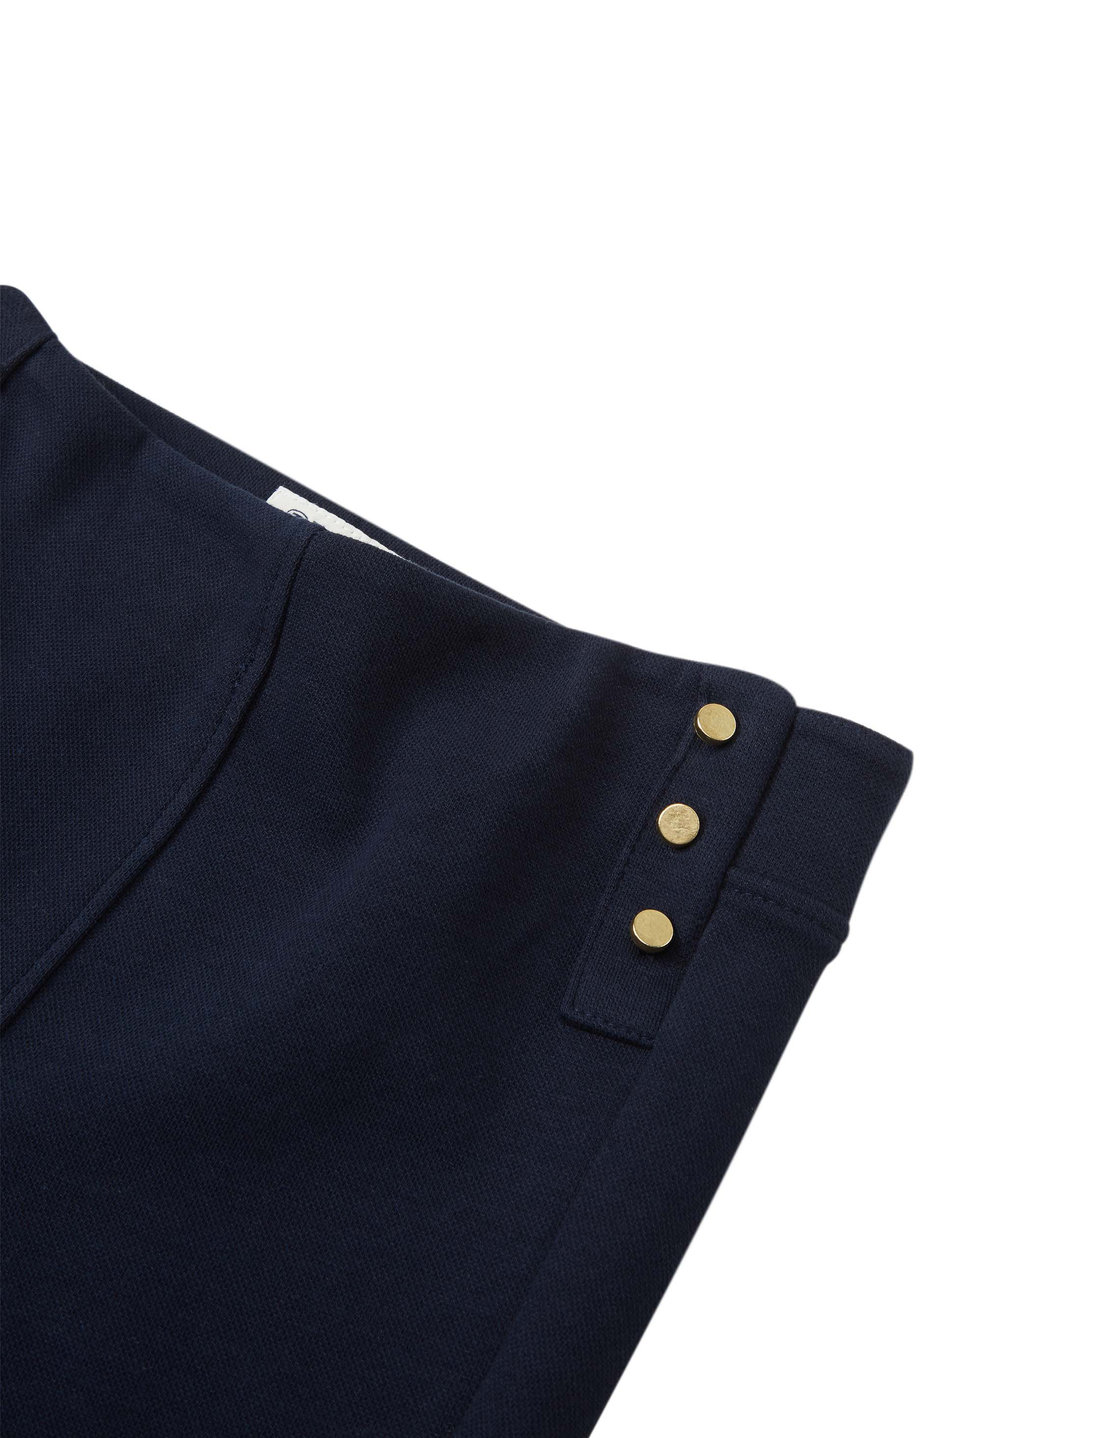 Tom Bottoms Pants Jersey Detailed - Tailor